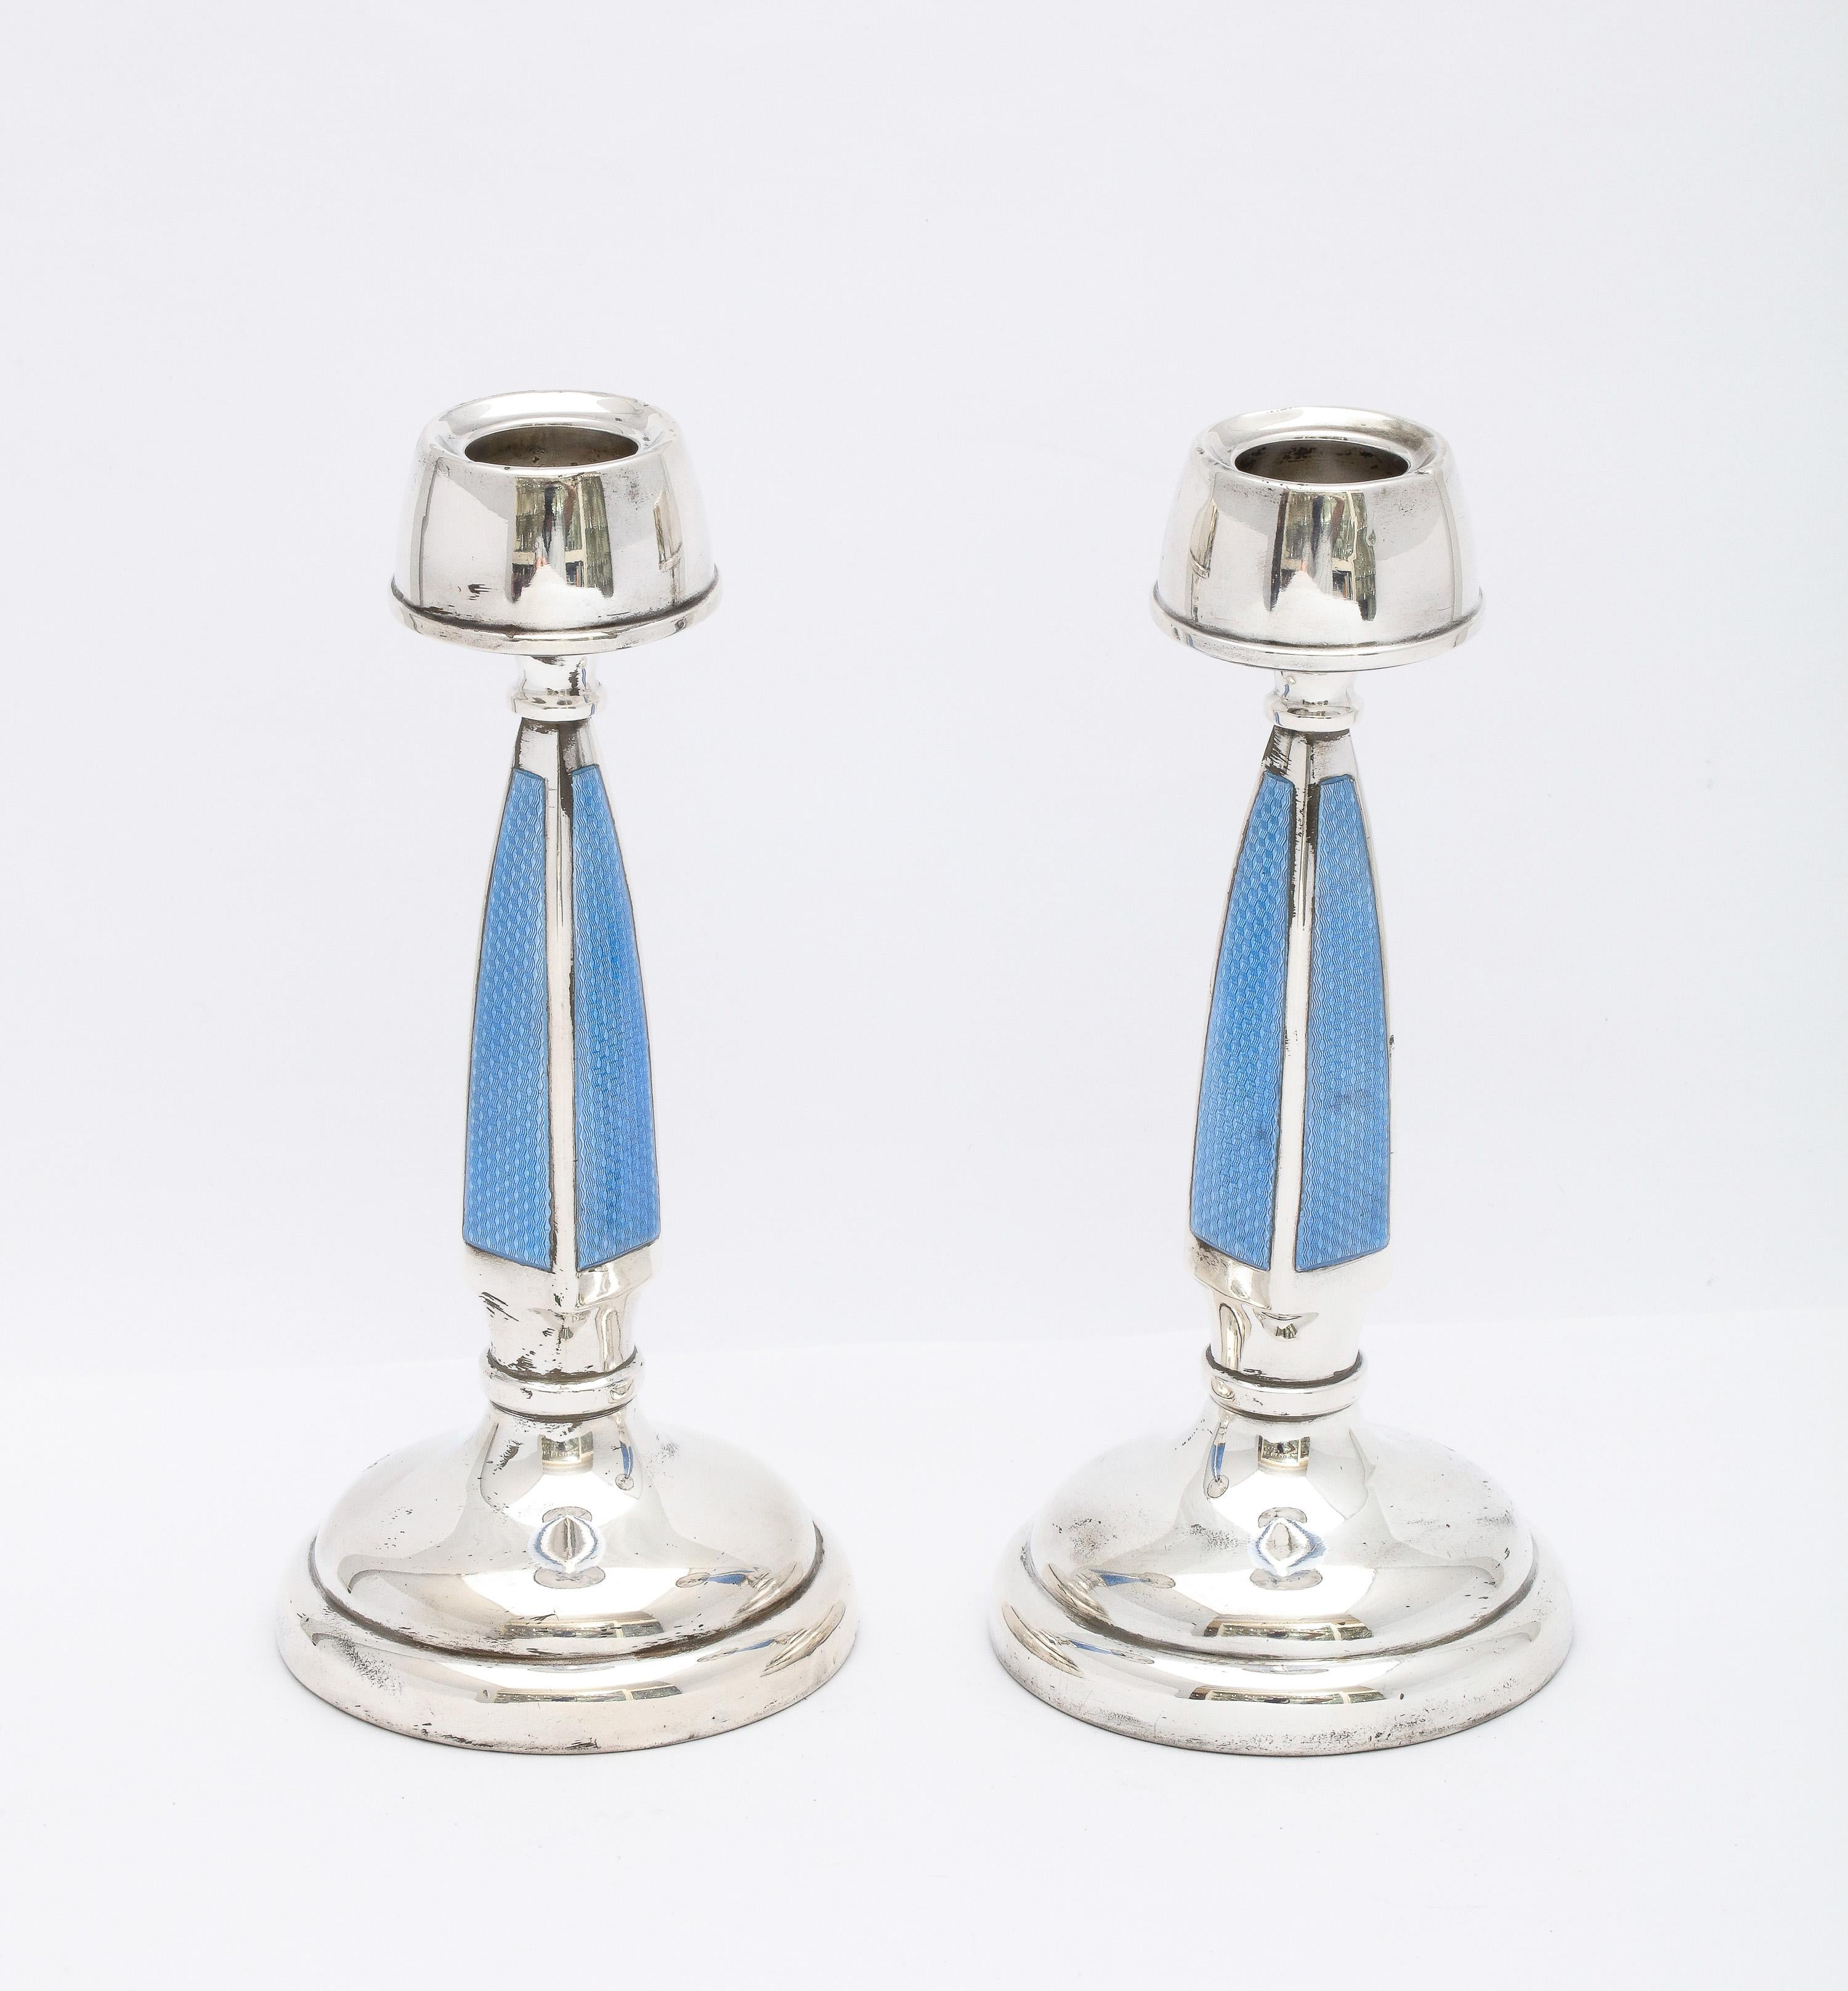 Rare Pair of Art Deco Sterling Silver and Blue Guilloche Enamel Candlesticks For Sale 2